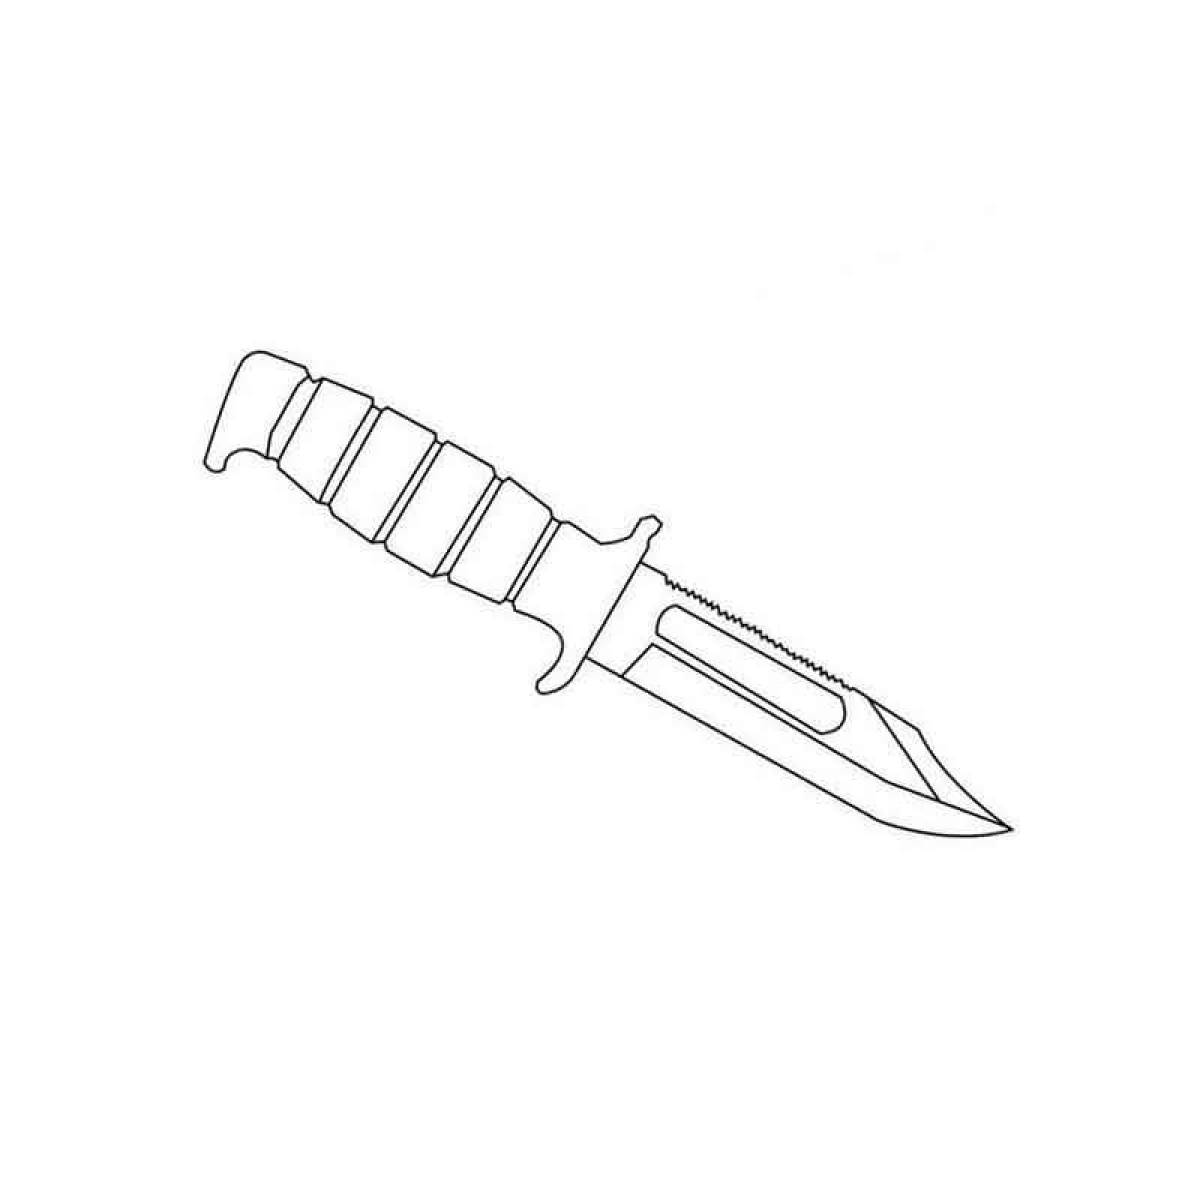 Artistic standoff 2 knives coloring page